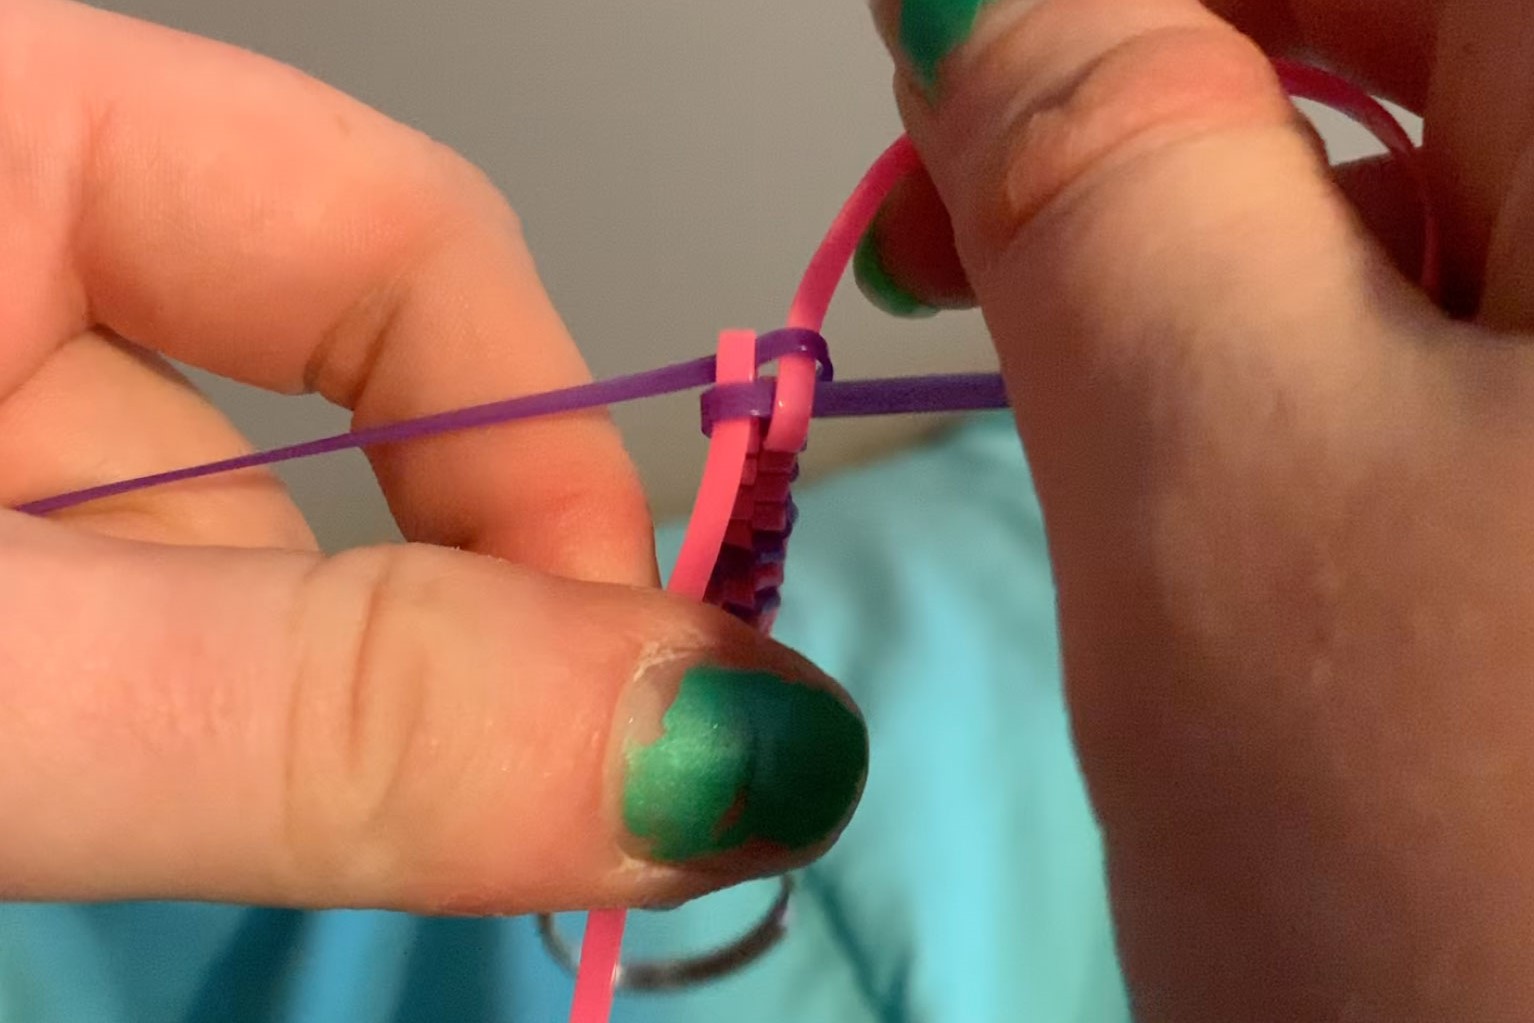 Quadruple Crafting: Initiating A Lanyard With Four Strings